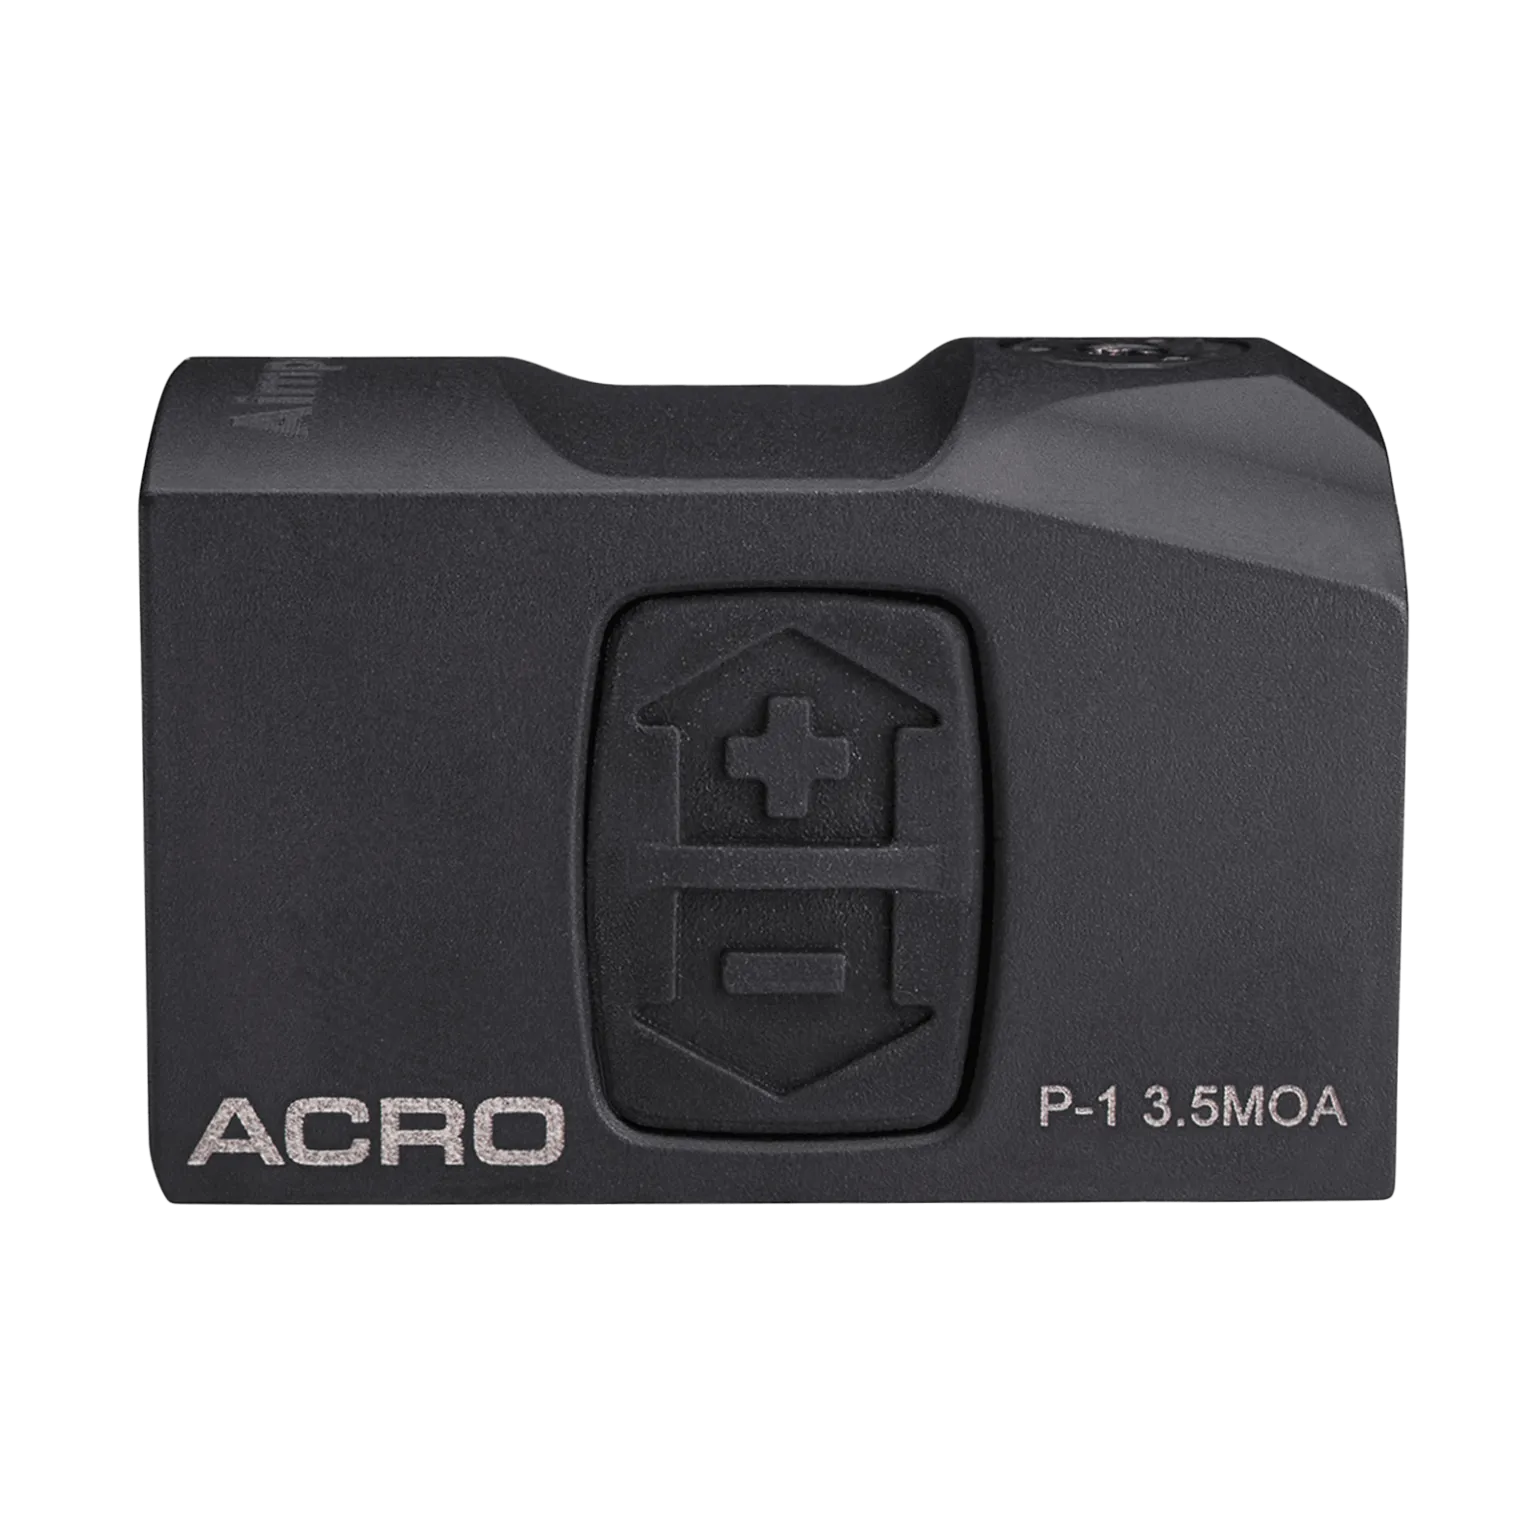 Acro P-1™ 3.5 MOA - Red dot reflex sight with integrated Acro™ interface - 2